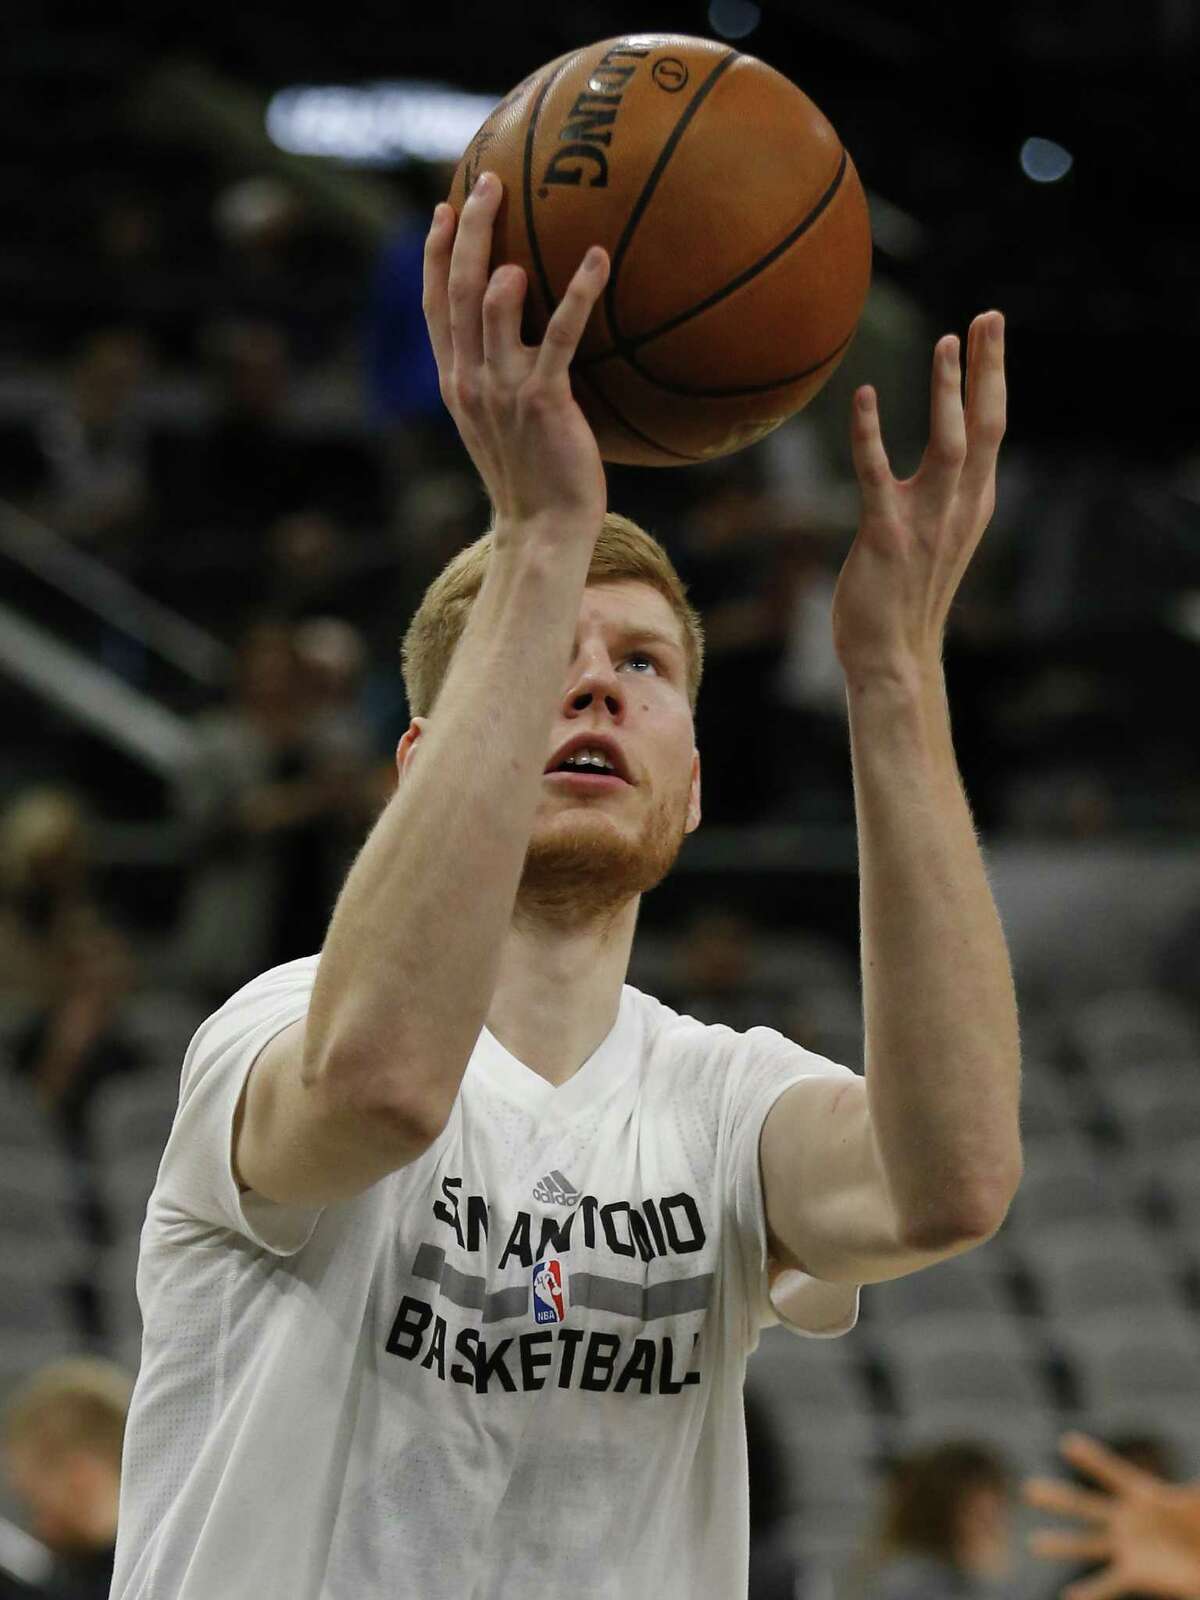 Davis Bertans says he can’t palm the basketball with his right hand, but other than that, his childhood injury doesn’t deter his game. Said Bertans: “It’s been so long that I don’t even think about it. Seems regular to me.”